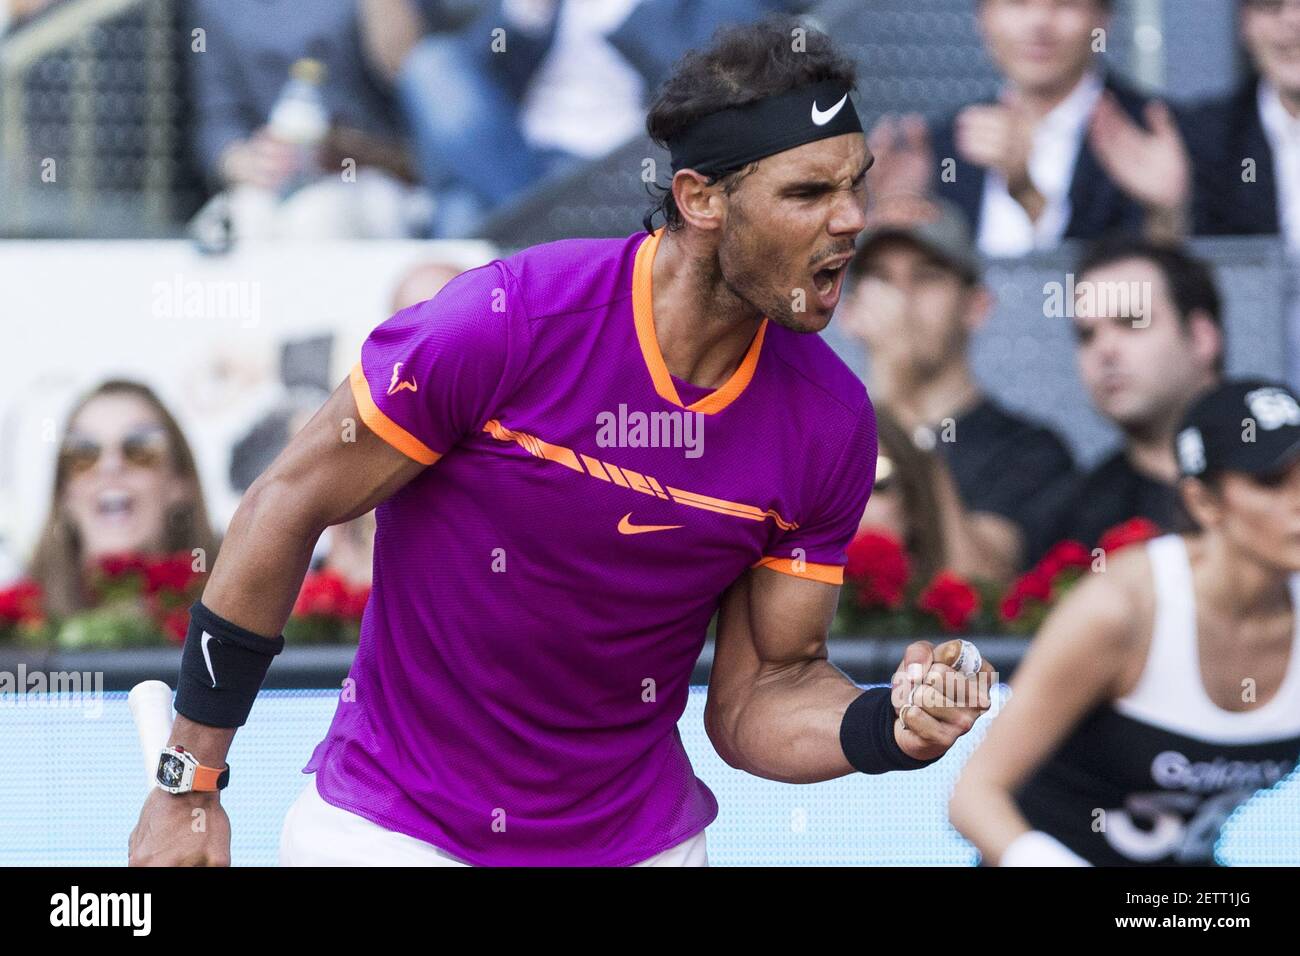 Rafael Nadal beat Dominic Thiem 7-6 (10-8) 6-4 to win his fifth Madrid Open  title on May 14, 2017. Rafa Nadal during the ATP final of Mutua Madrid Open Tennis  2017 at